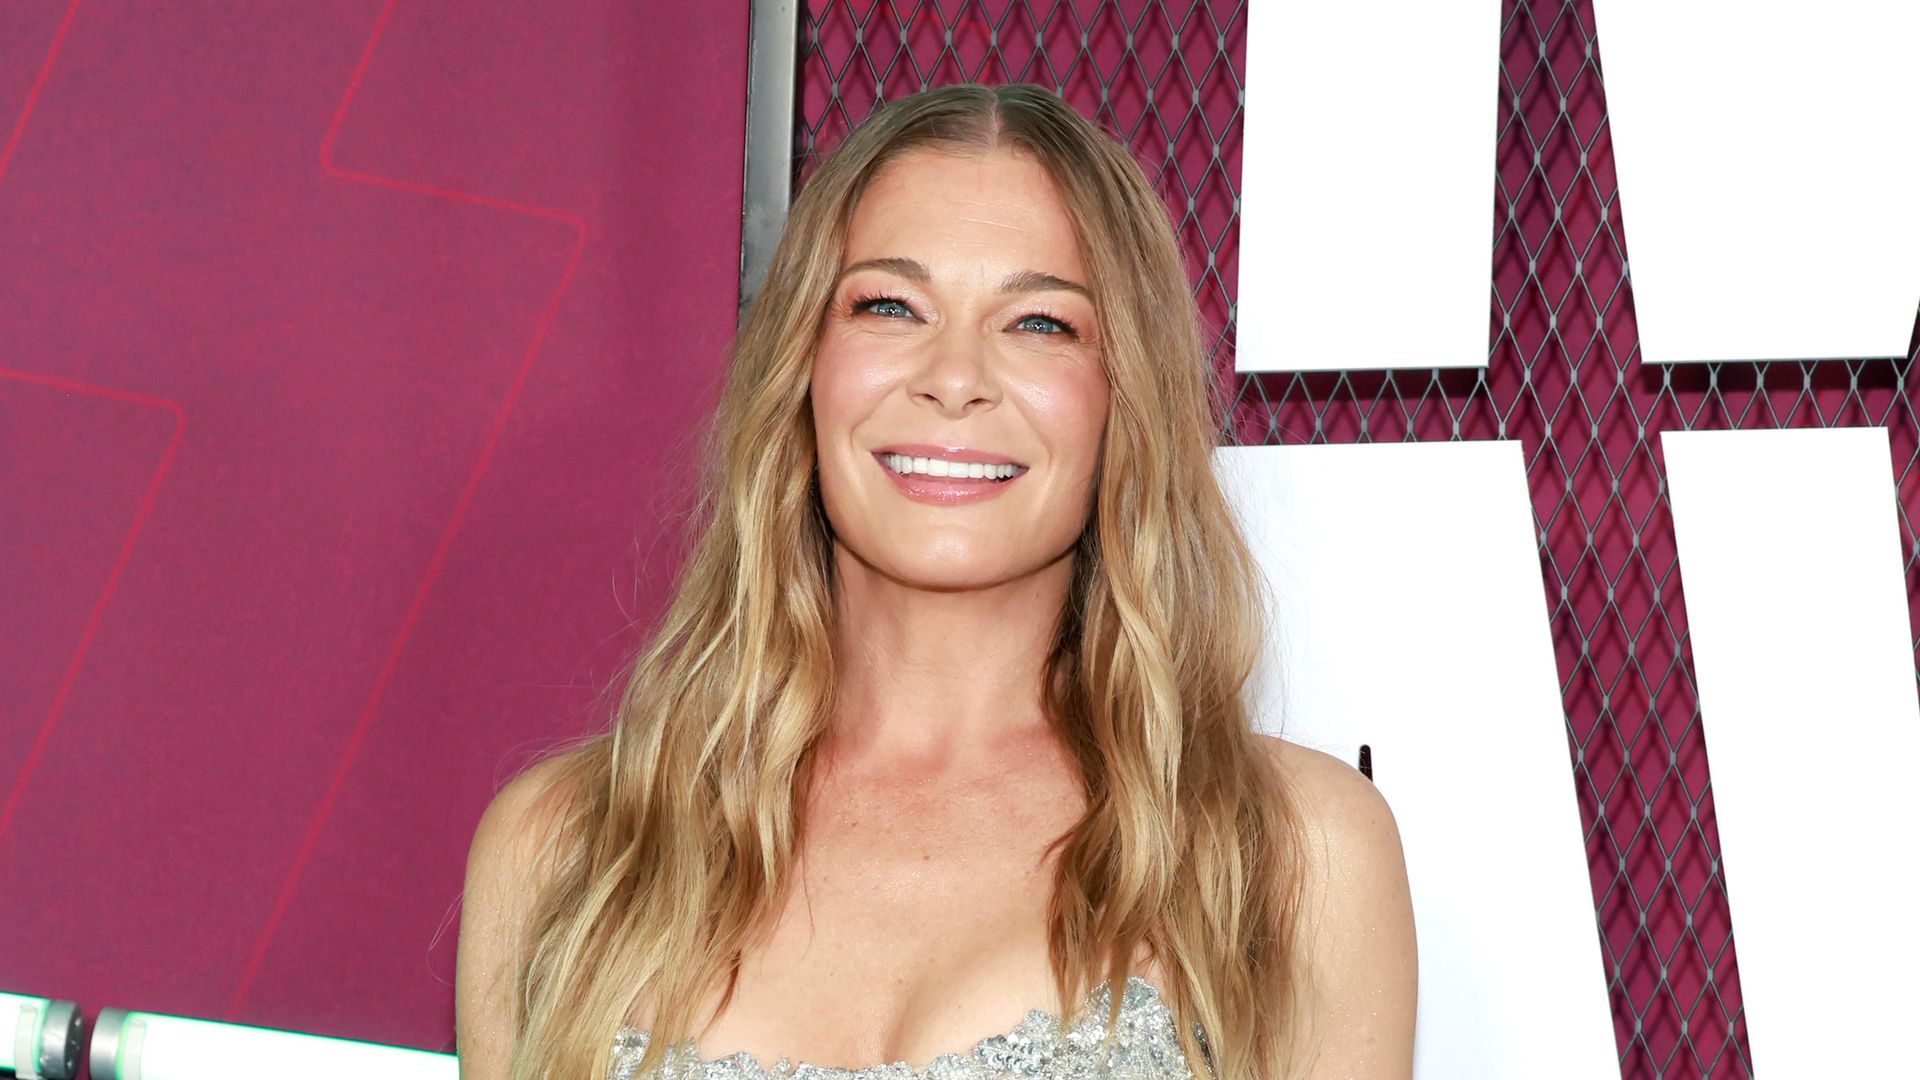 LeAnn Rimes attends the 2023 CMT Music Awards at Moody Center on April 02, 2023 in Austin, Texas